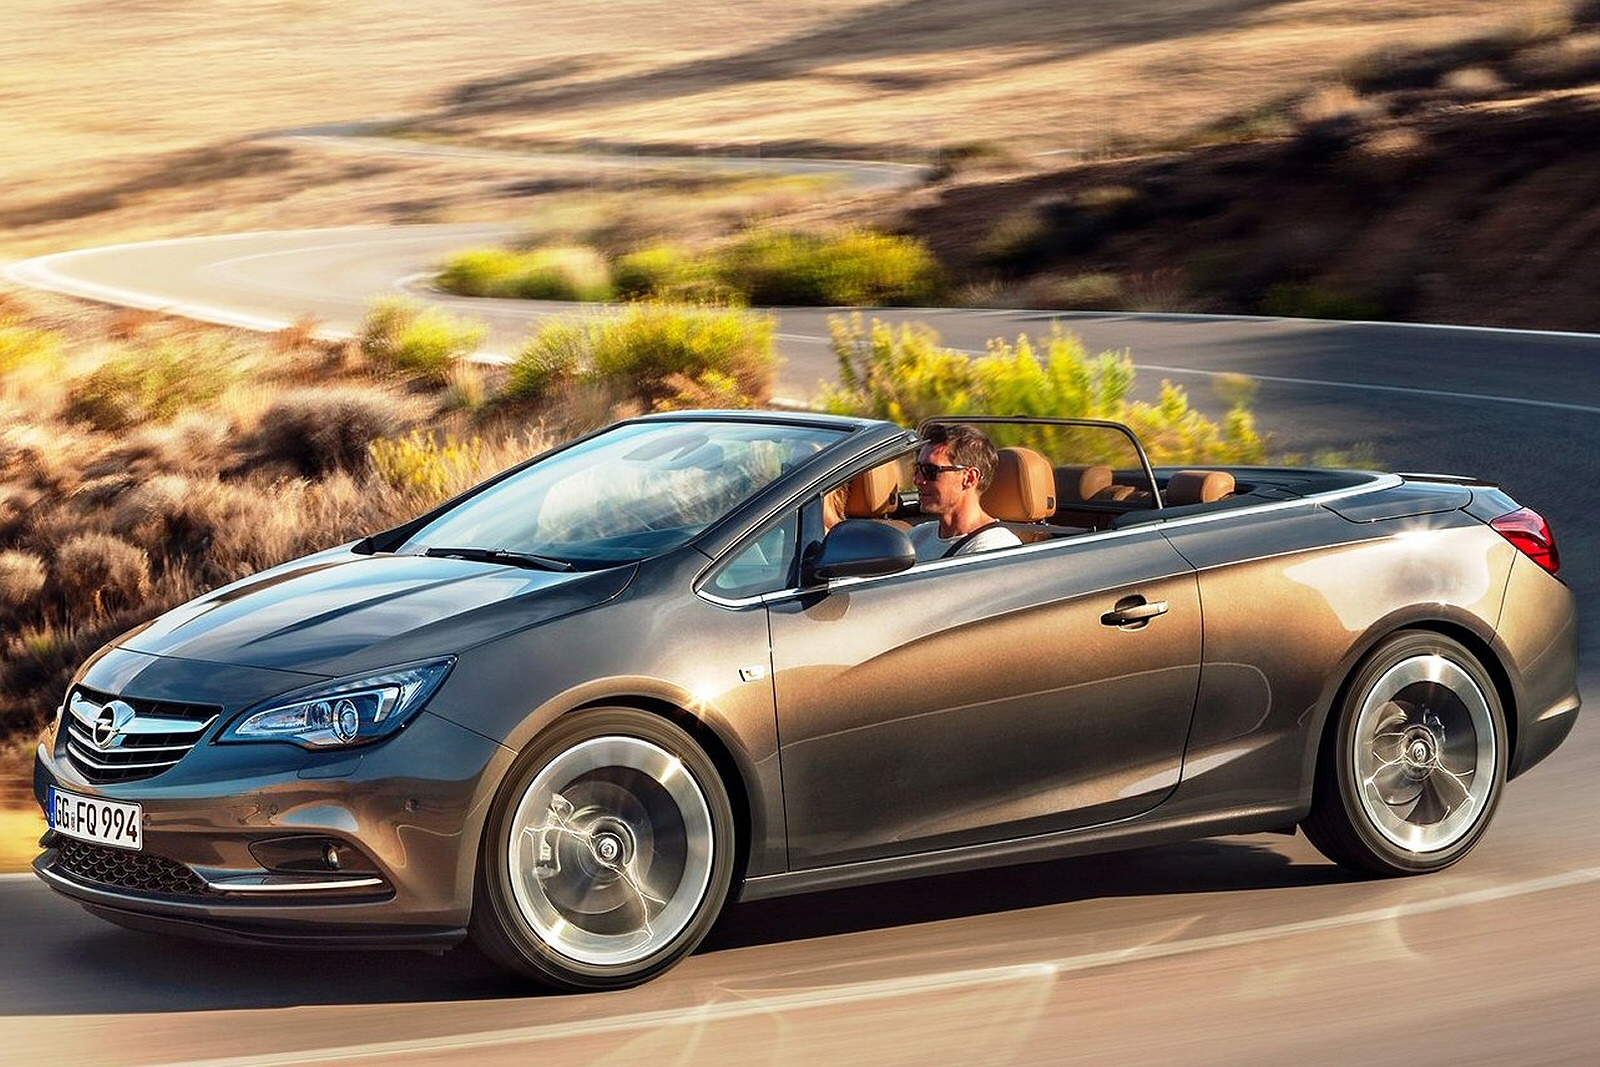 Front view of 2014 Vauxhall Cascada